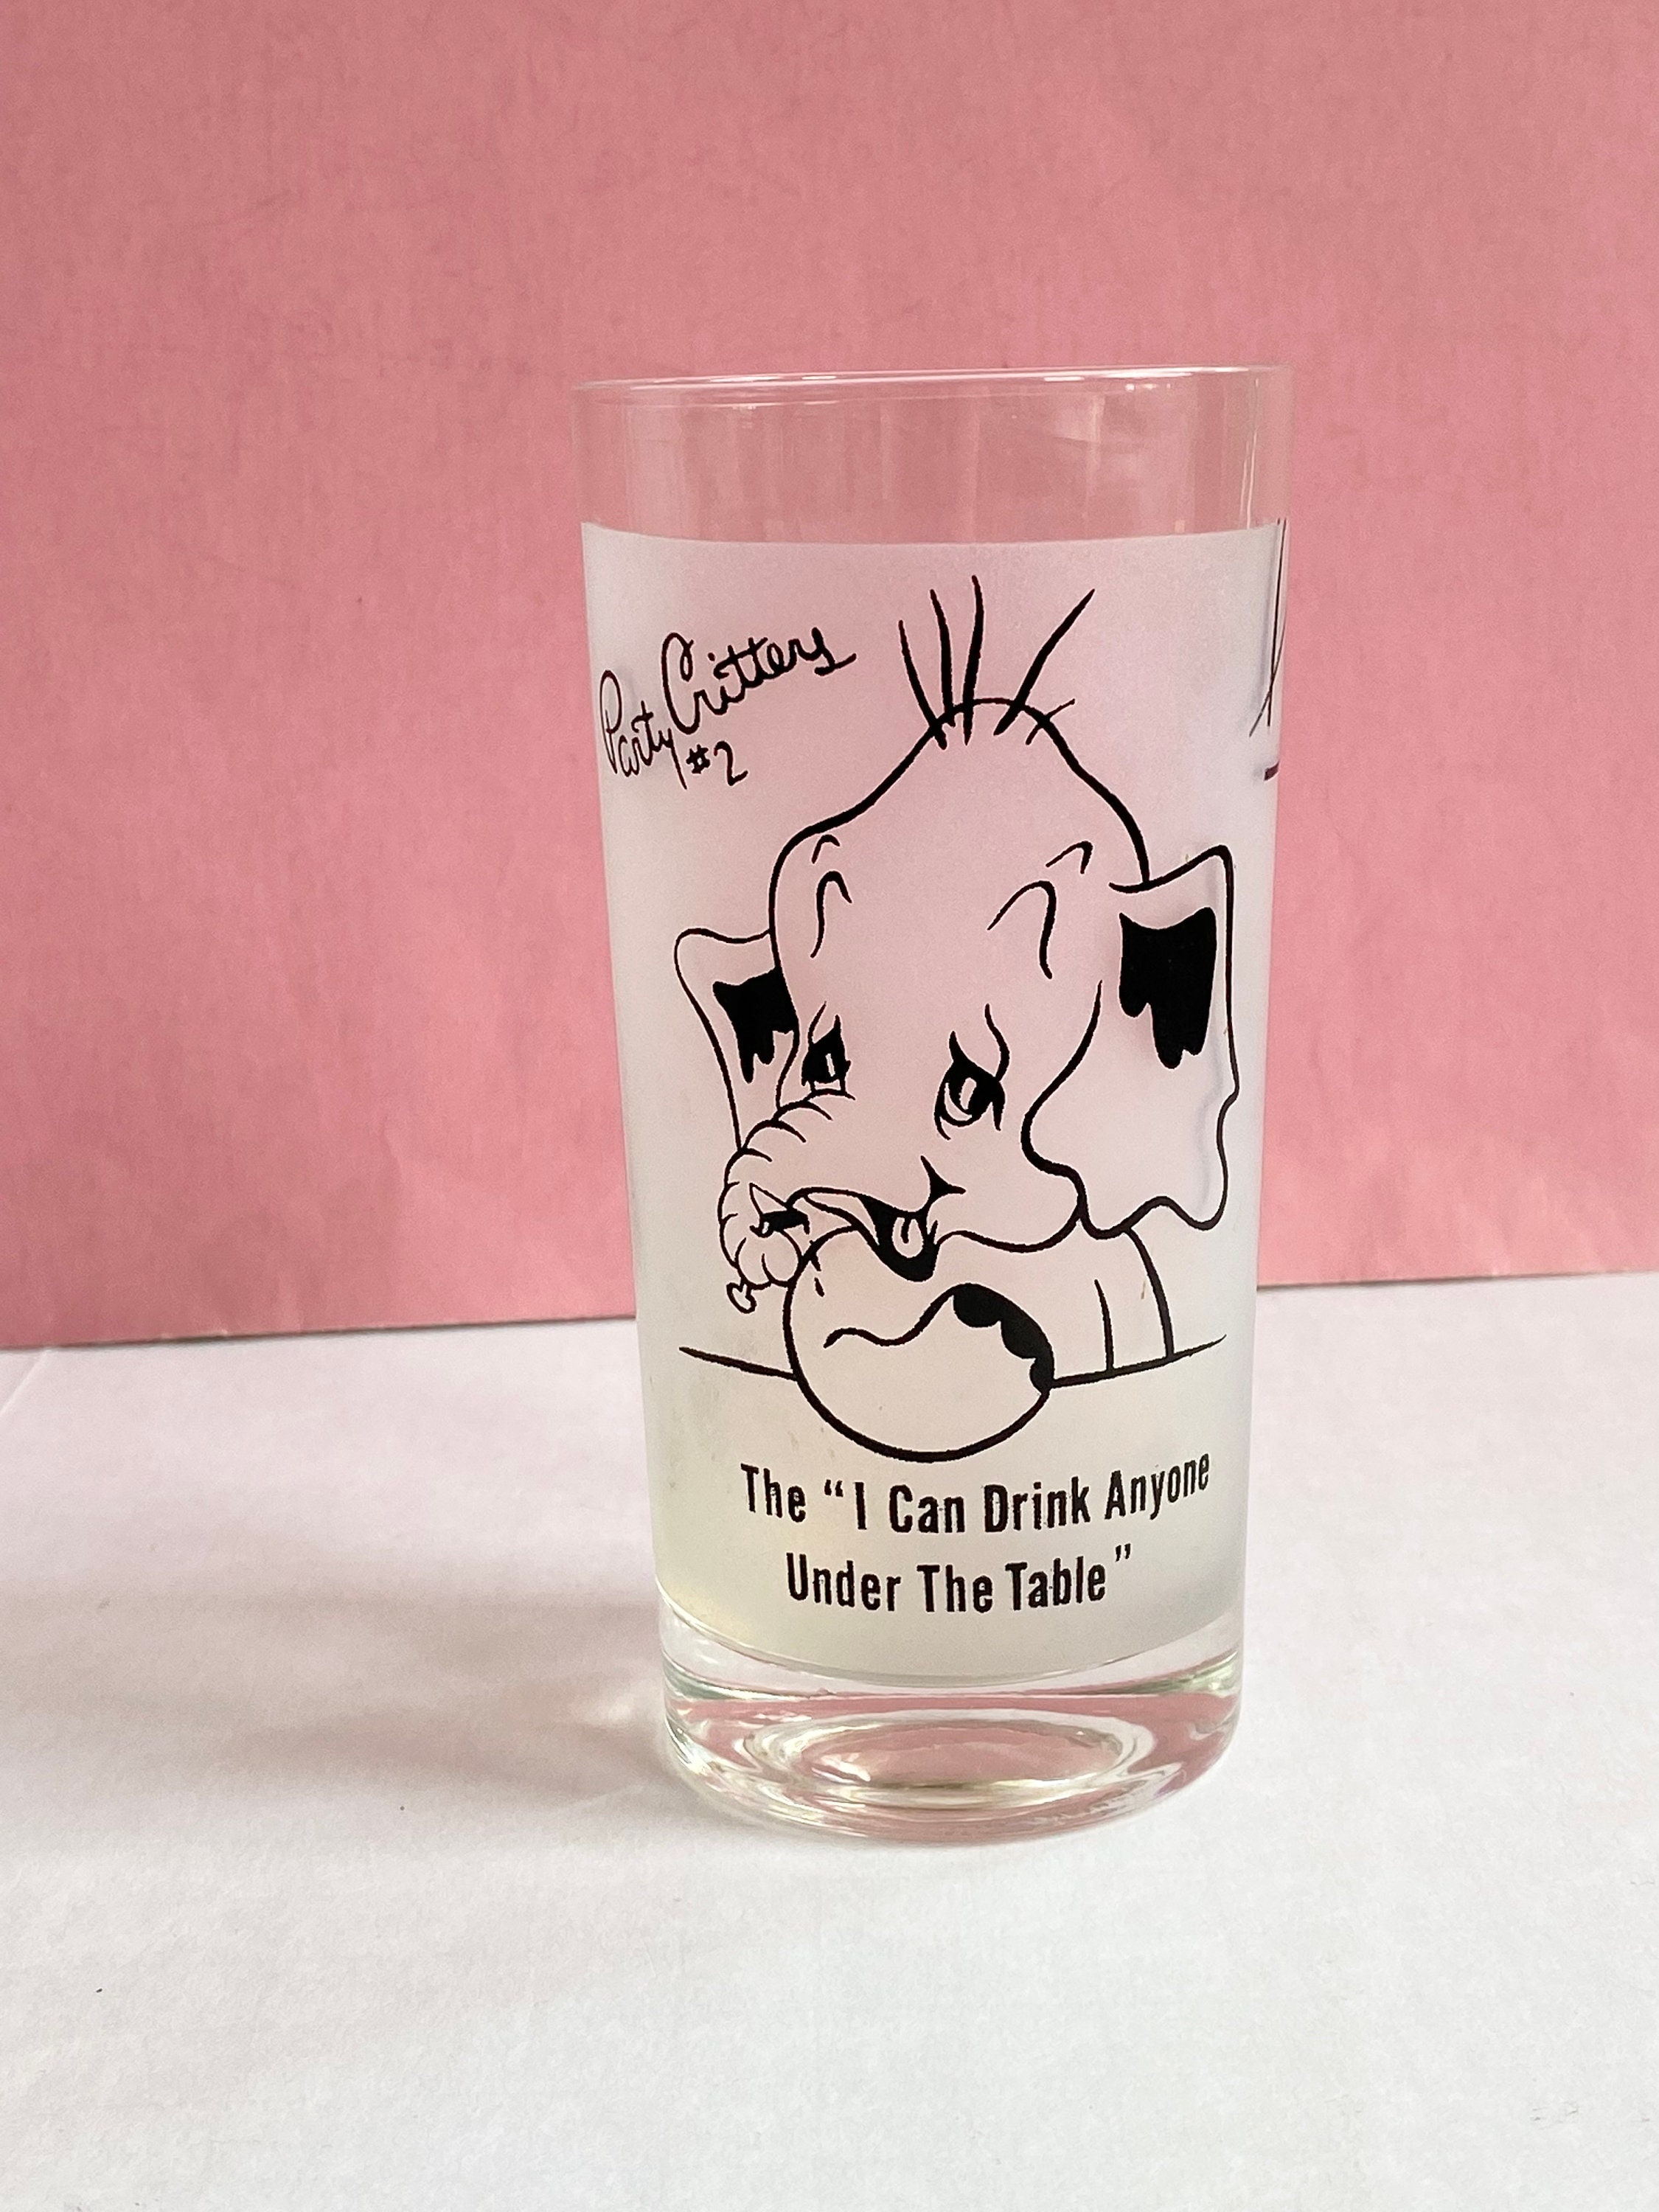 Hipster Elephant with a top hat drinking glass — Mixing Spirits